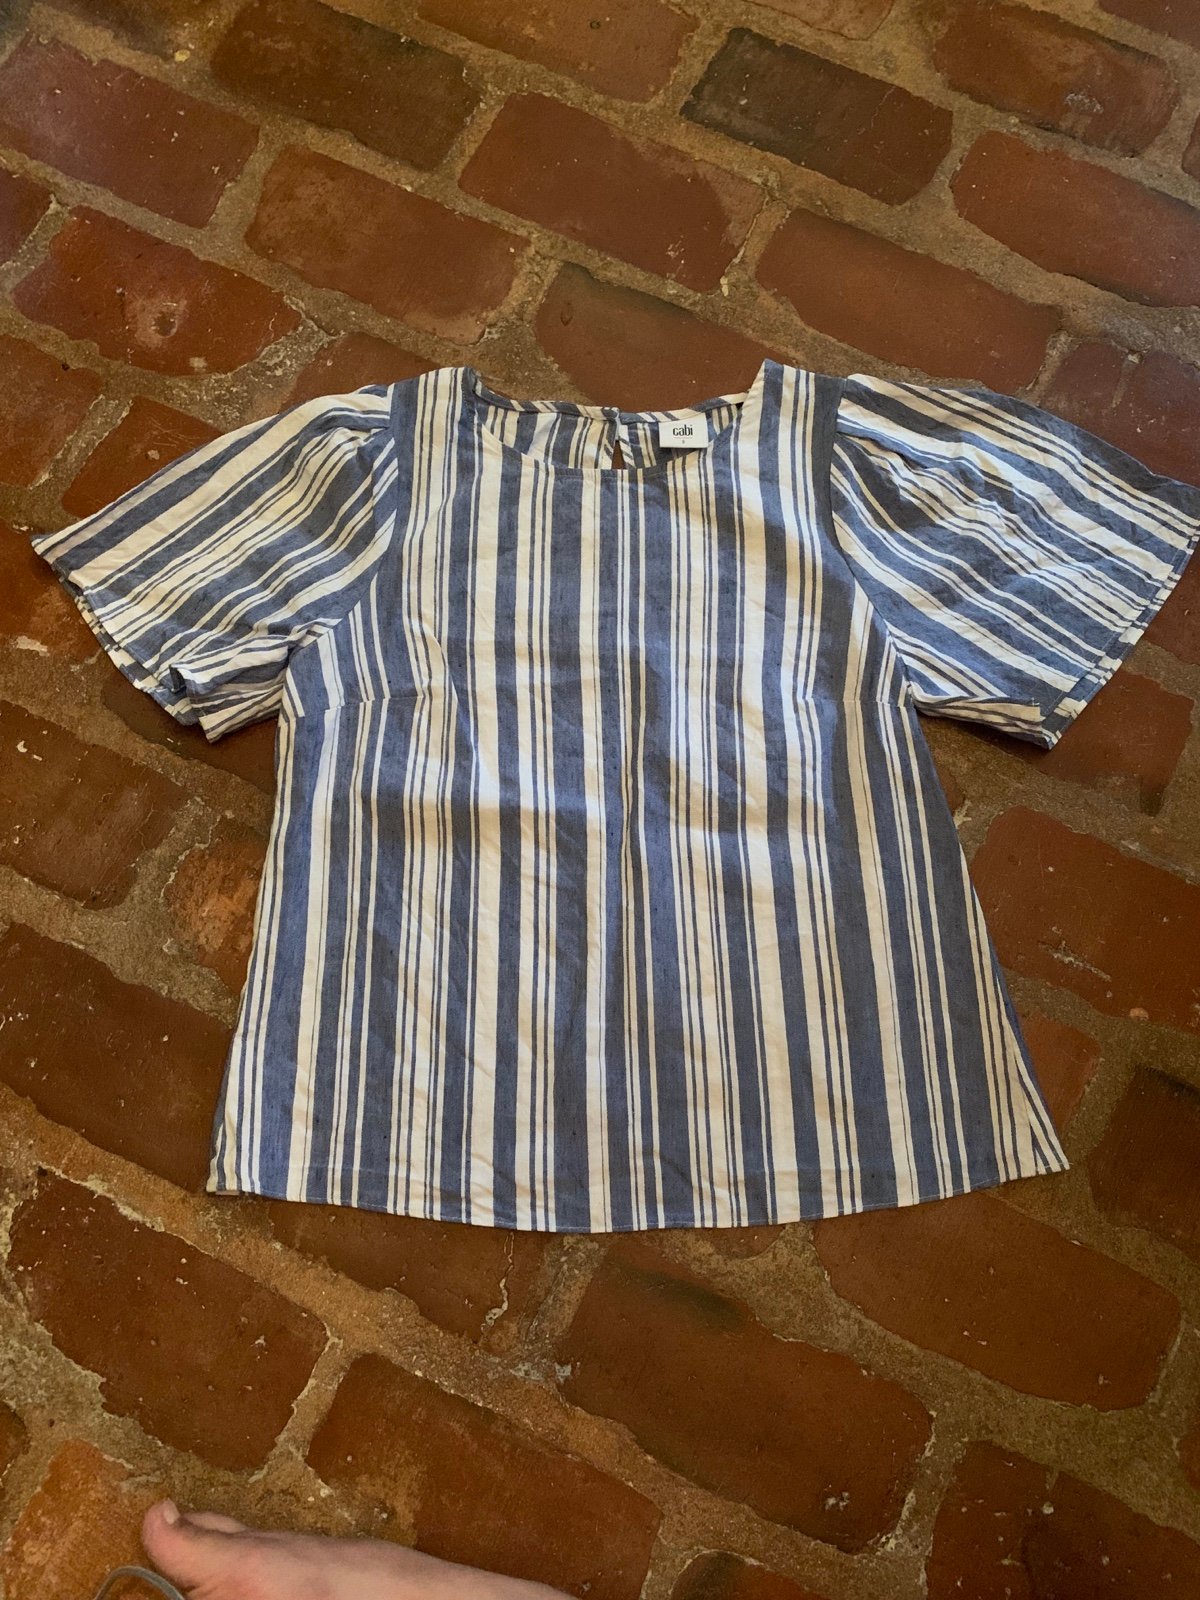 save up to 70% CABI Blue White Striped Womens Top Winged Sleeves Linen Blend SIZE SMALL k7Er8OdMV Everyday Low Prices